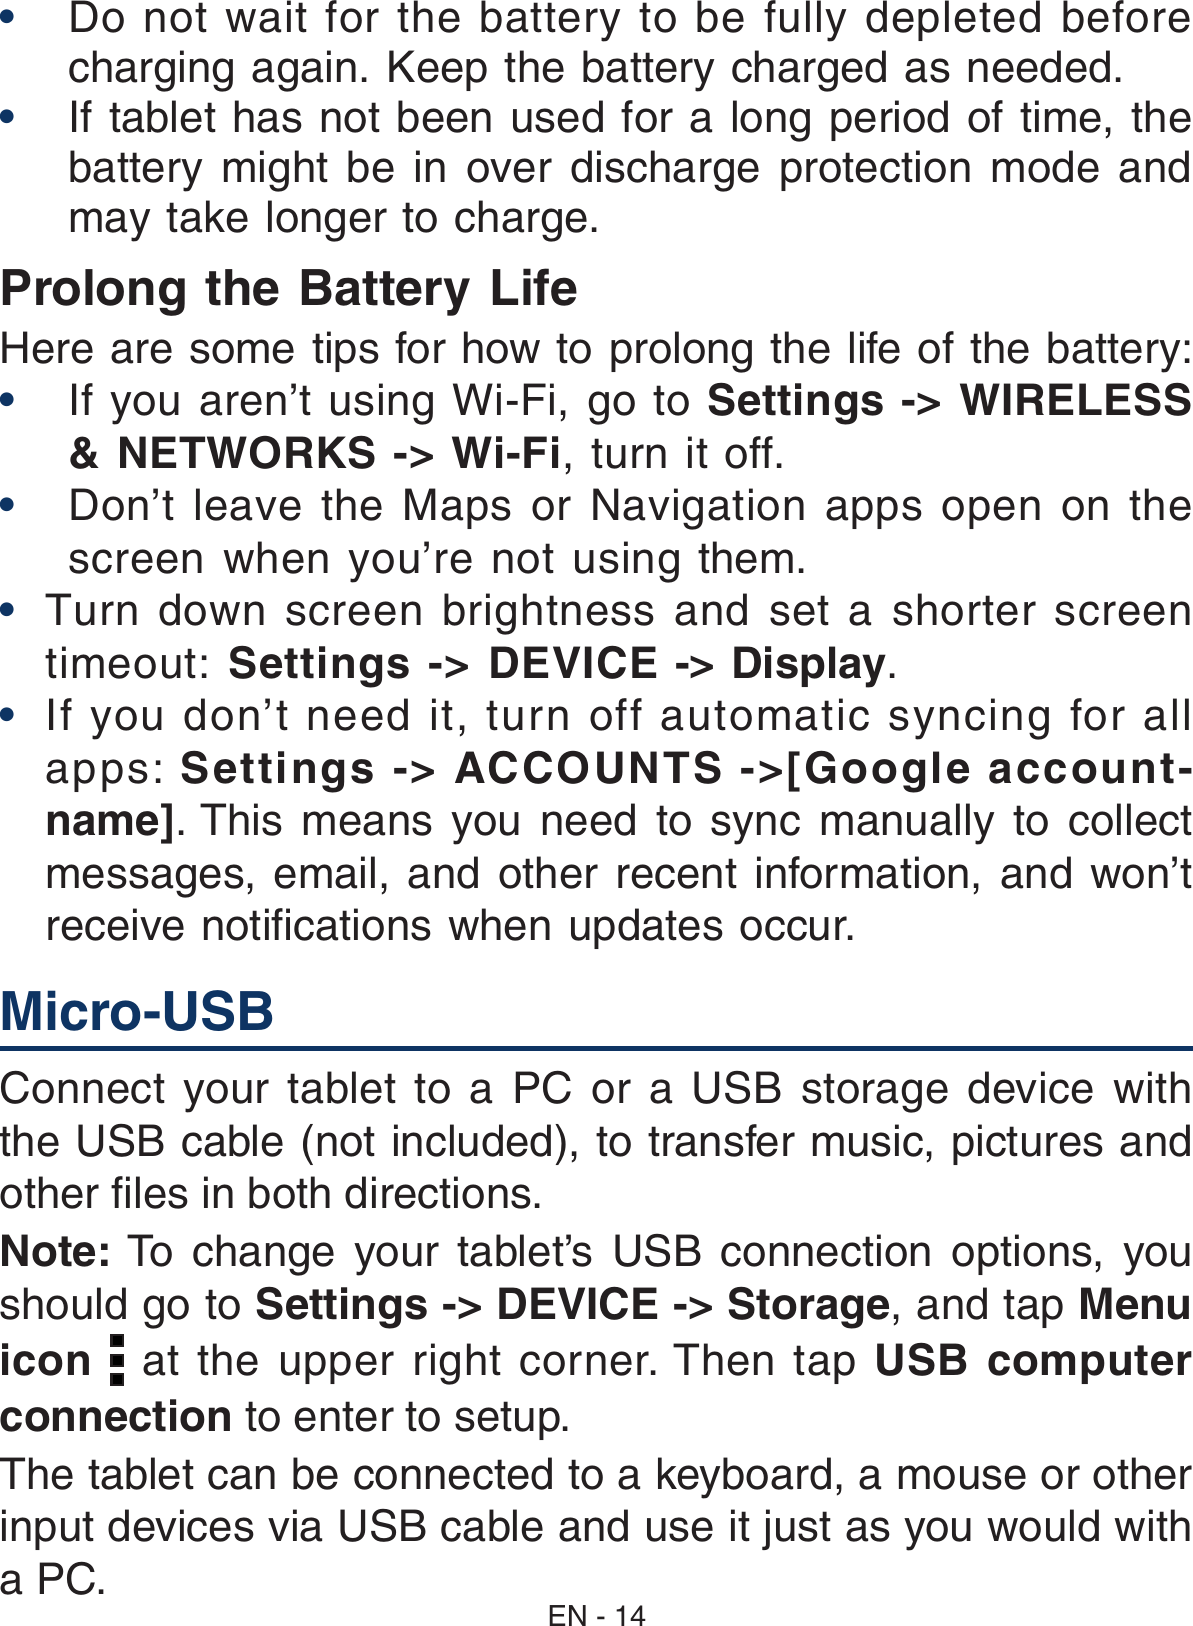 •  Do not wait for the battery to be fully depleted before charging again. Keep the battery charged as needed.•  If tablet has not been used for a long period of time, the battery  might  be  in  over  discharge  protection  mode  and may take longer to charge. Prolong the Battery Life  Here are some tips for how to prolong the life of the battery:• If you aren’t using Wi-Fi, go to Settings -&gt; WIRELESS &amp; NETWORKS -&gt; Wi-Fi, turn it off. • Don’t leave the Maps or Navigation apps open on the screen when you’re not using them. •   Turn down screen brightness and set a shorter screen timeout: Settings -&gt; DEVICE -&gt; Display.•  If you don’t need it, turn off automatic syncing for all apps: Settings -&gt; ACCOUNTS -&gt;[Google account-name]. This  means  you  need  to  sync  manually  to  collect messages,  email, and other recent  information,  and  won’t receive notiﬁcations when updates occur. EN - 14Connect your  tablet  to  a  PC  or  a USB storage  device with the USB cable (not included), to transfer music, pictures and other files in both directions.Note: To  change  your  tablet’s  USB  connection  options,  you should go to Settings -&gt; DEVICE -&gt; Storage, and tap Menu icon   at  the  upper  right  corner. Then  tap  USB computer connection to enter to setup.The tablet can be connected to a keyboard, a mouse or other input devices via USB cable and use it just as you would with a PC.Micro-USB  